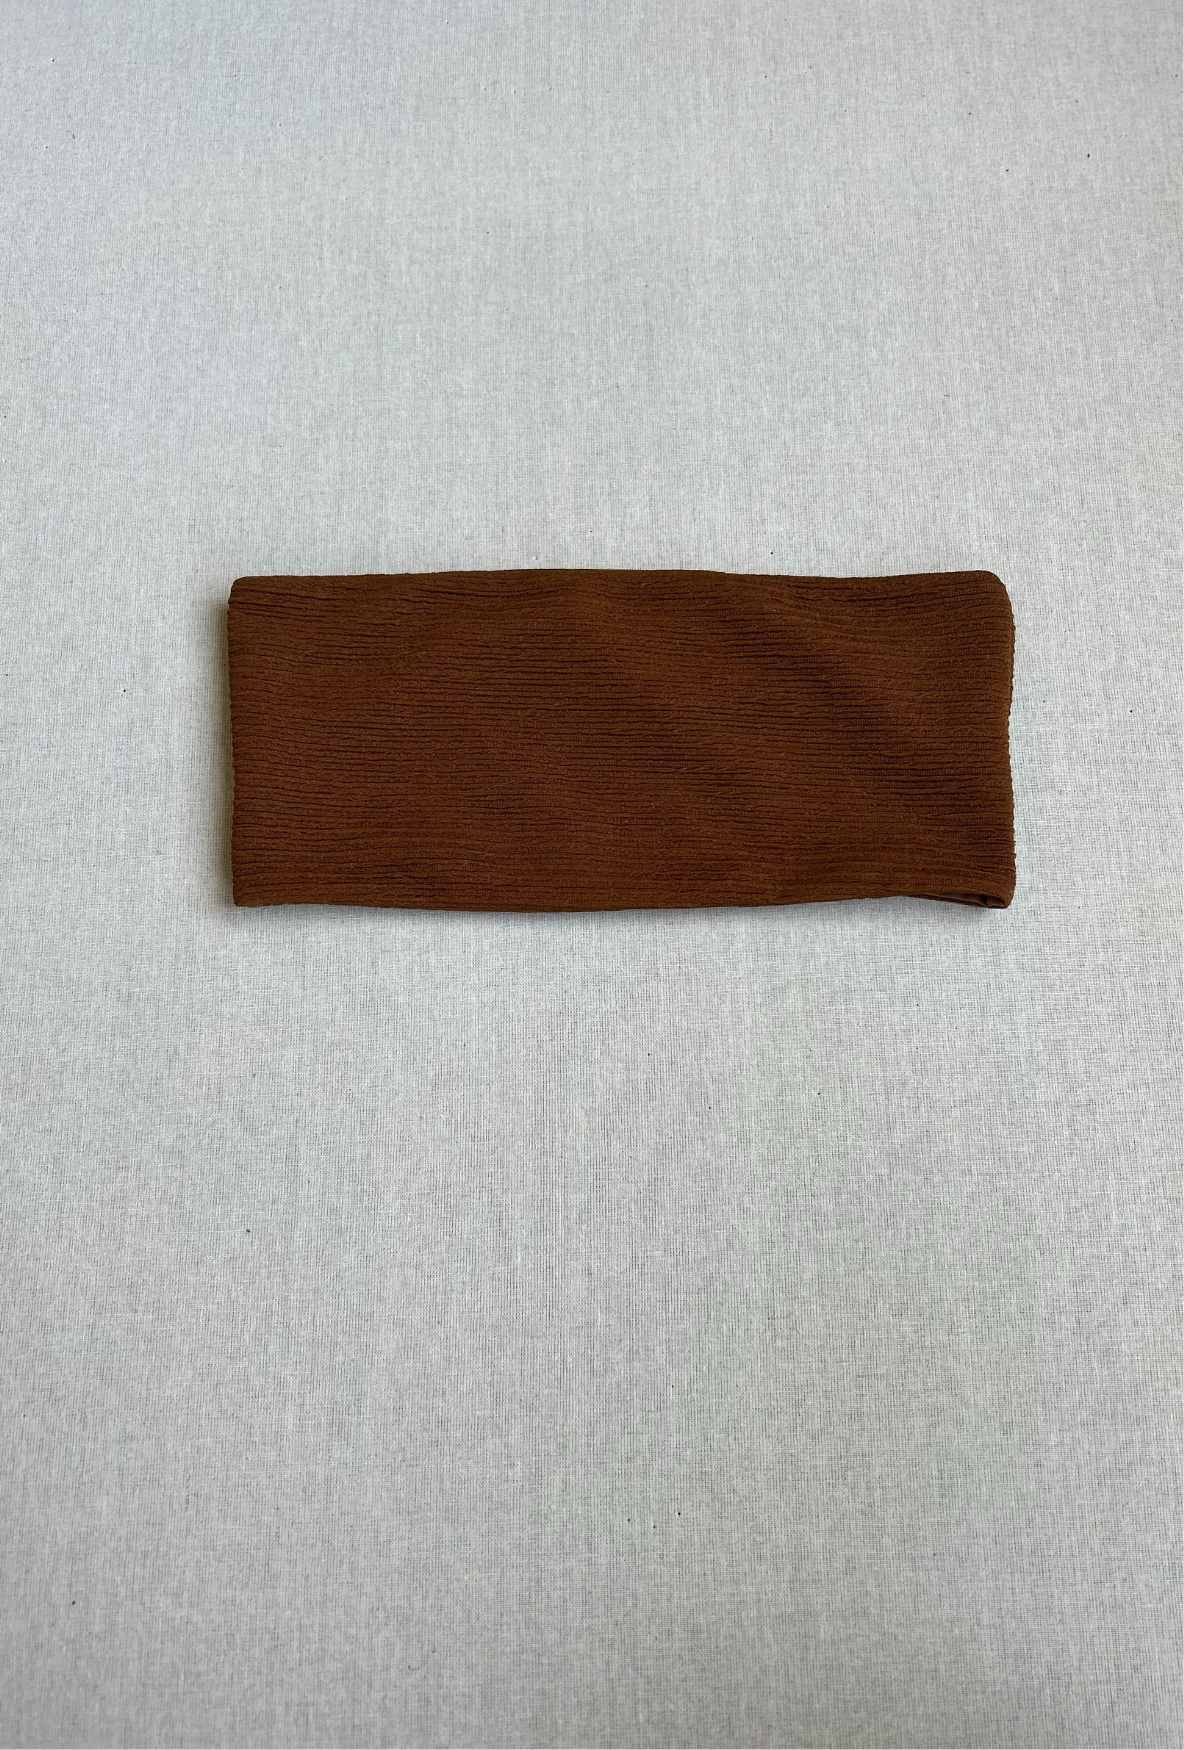 The Sari Top in Chestnut size Large